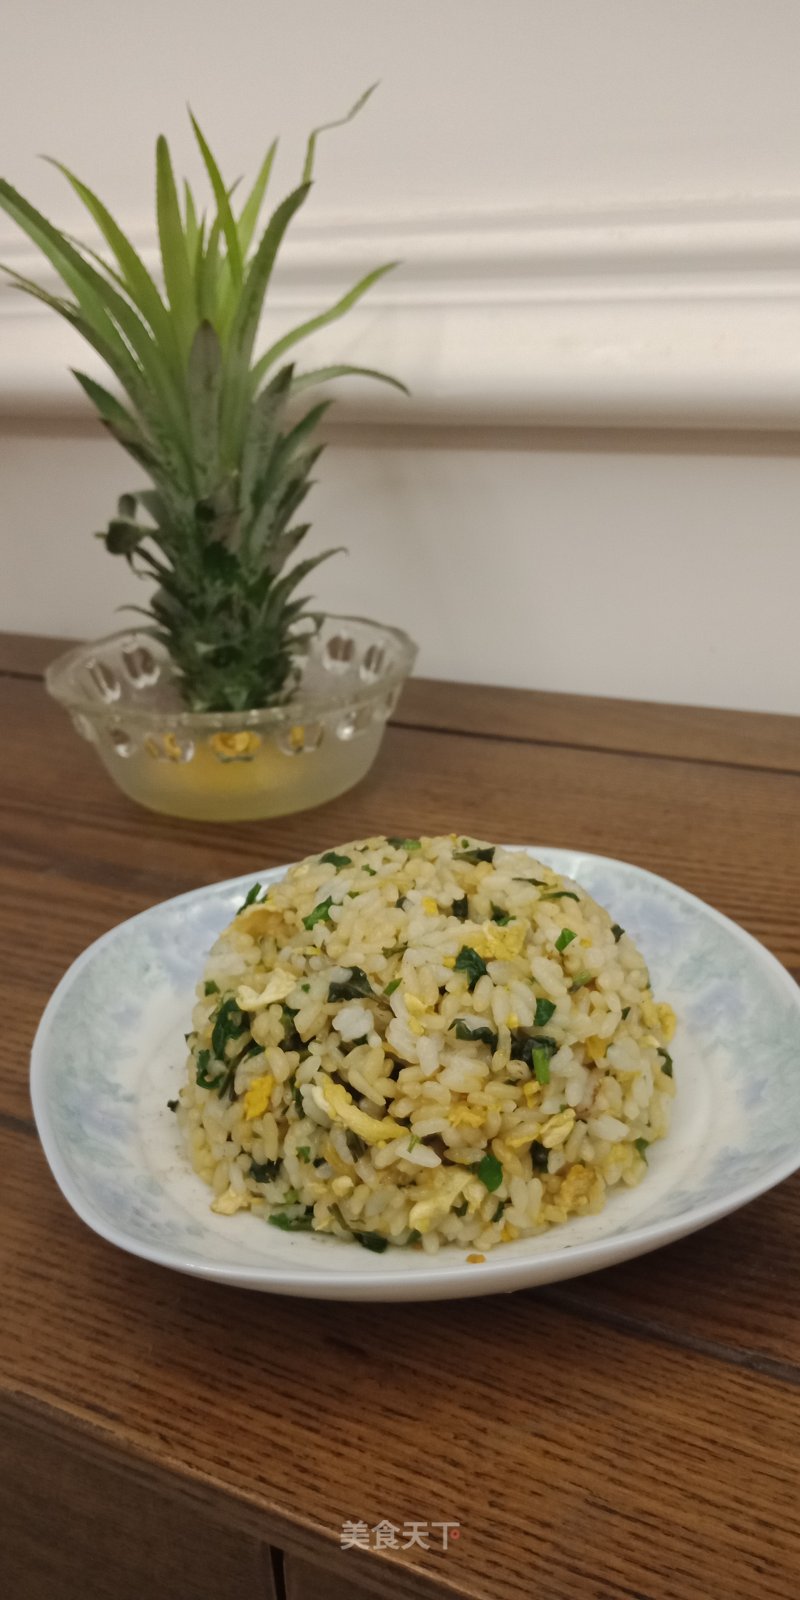 Fried Rice with Wolfberry Bud and Egg